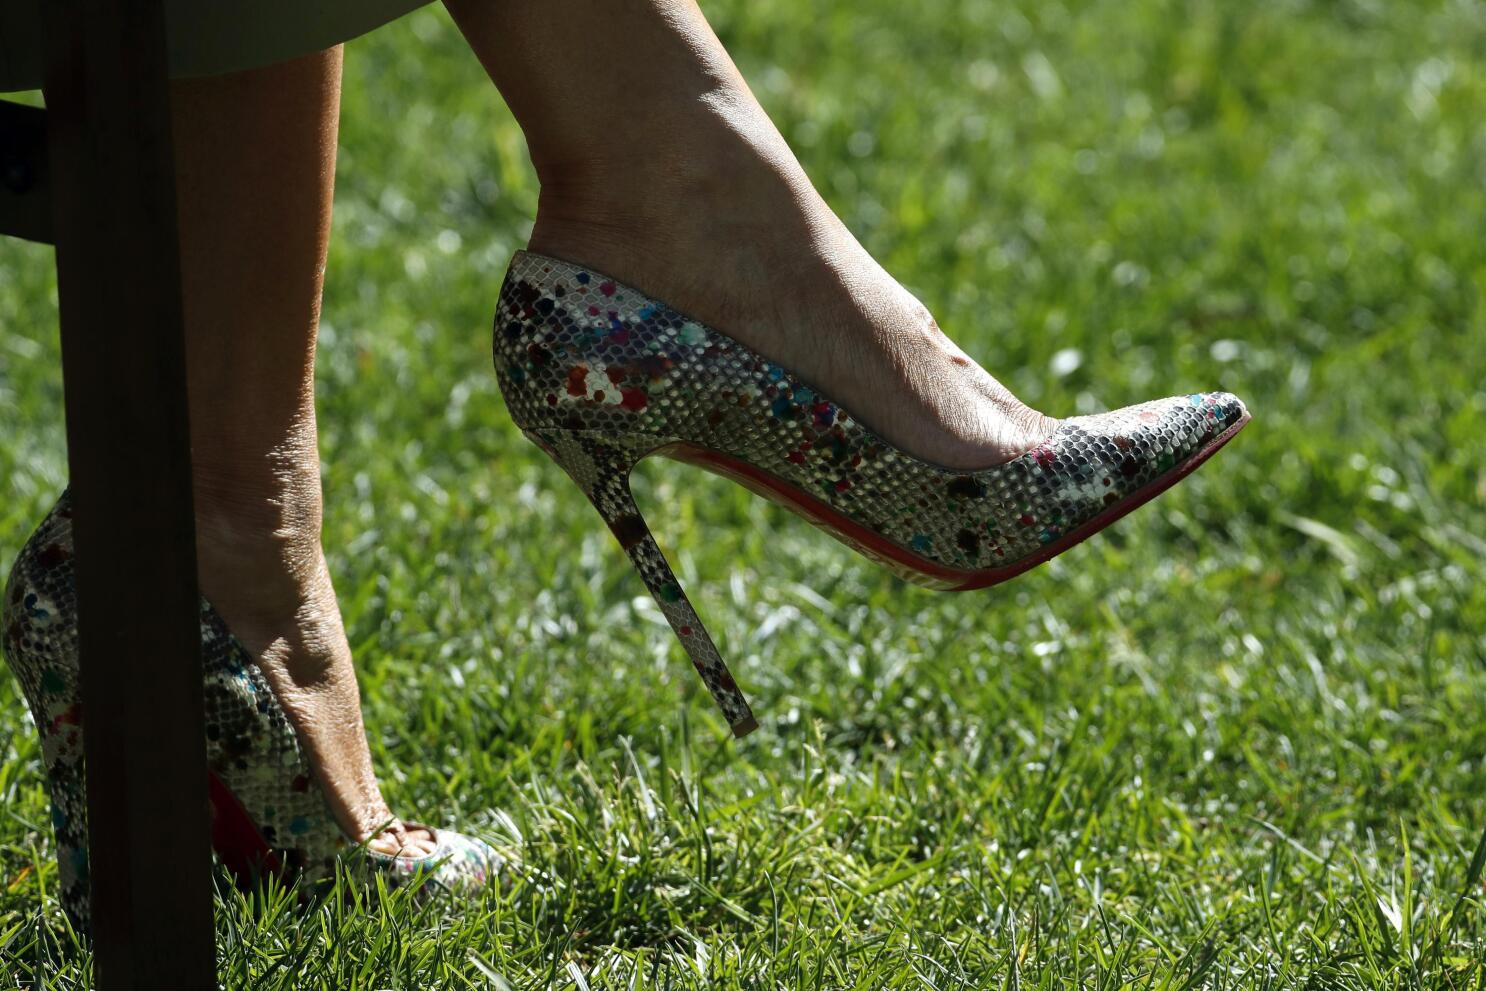 Red Soles, High Heels, and a Global Quest for Trademark Rights